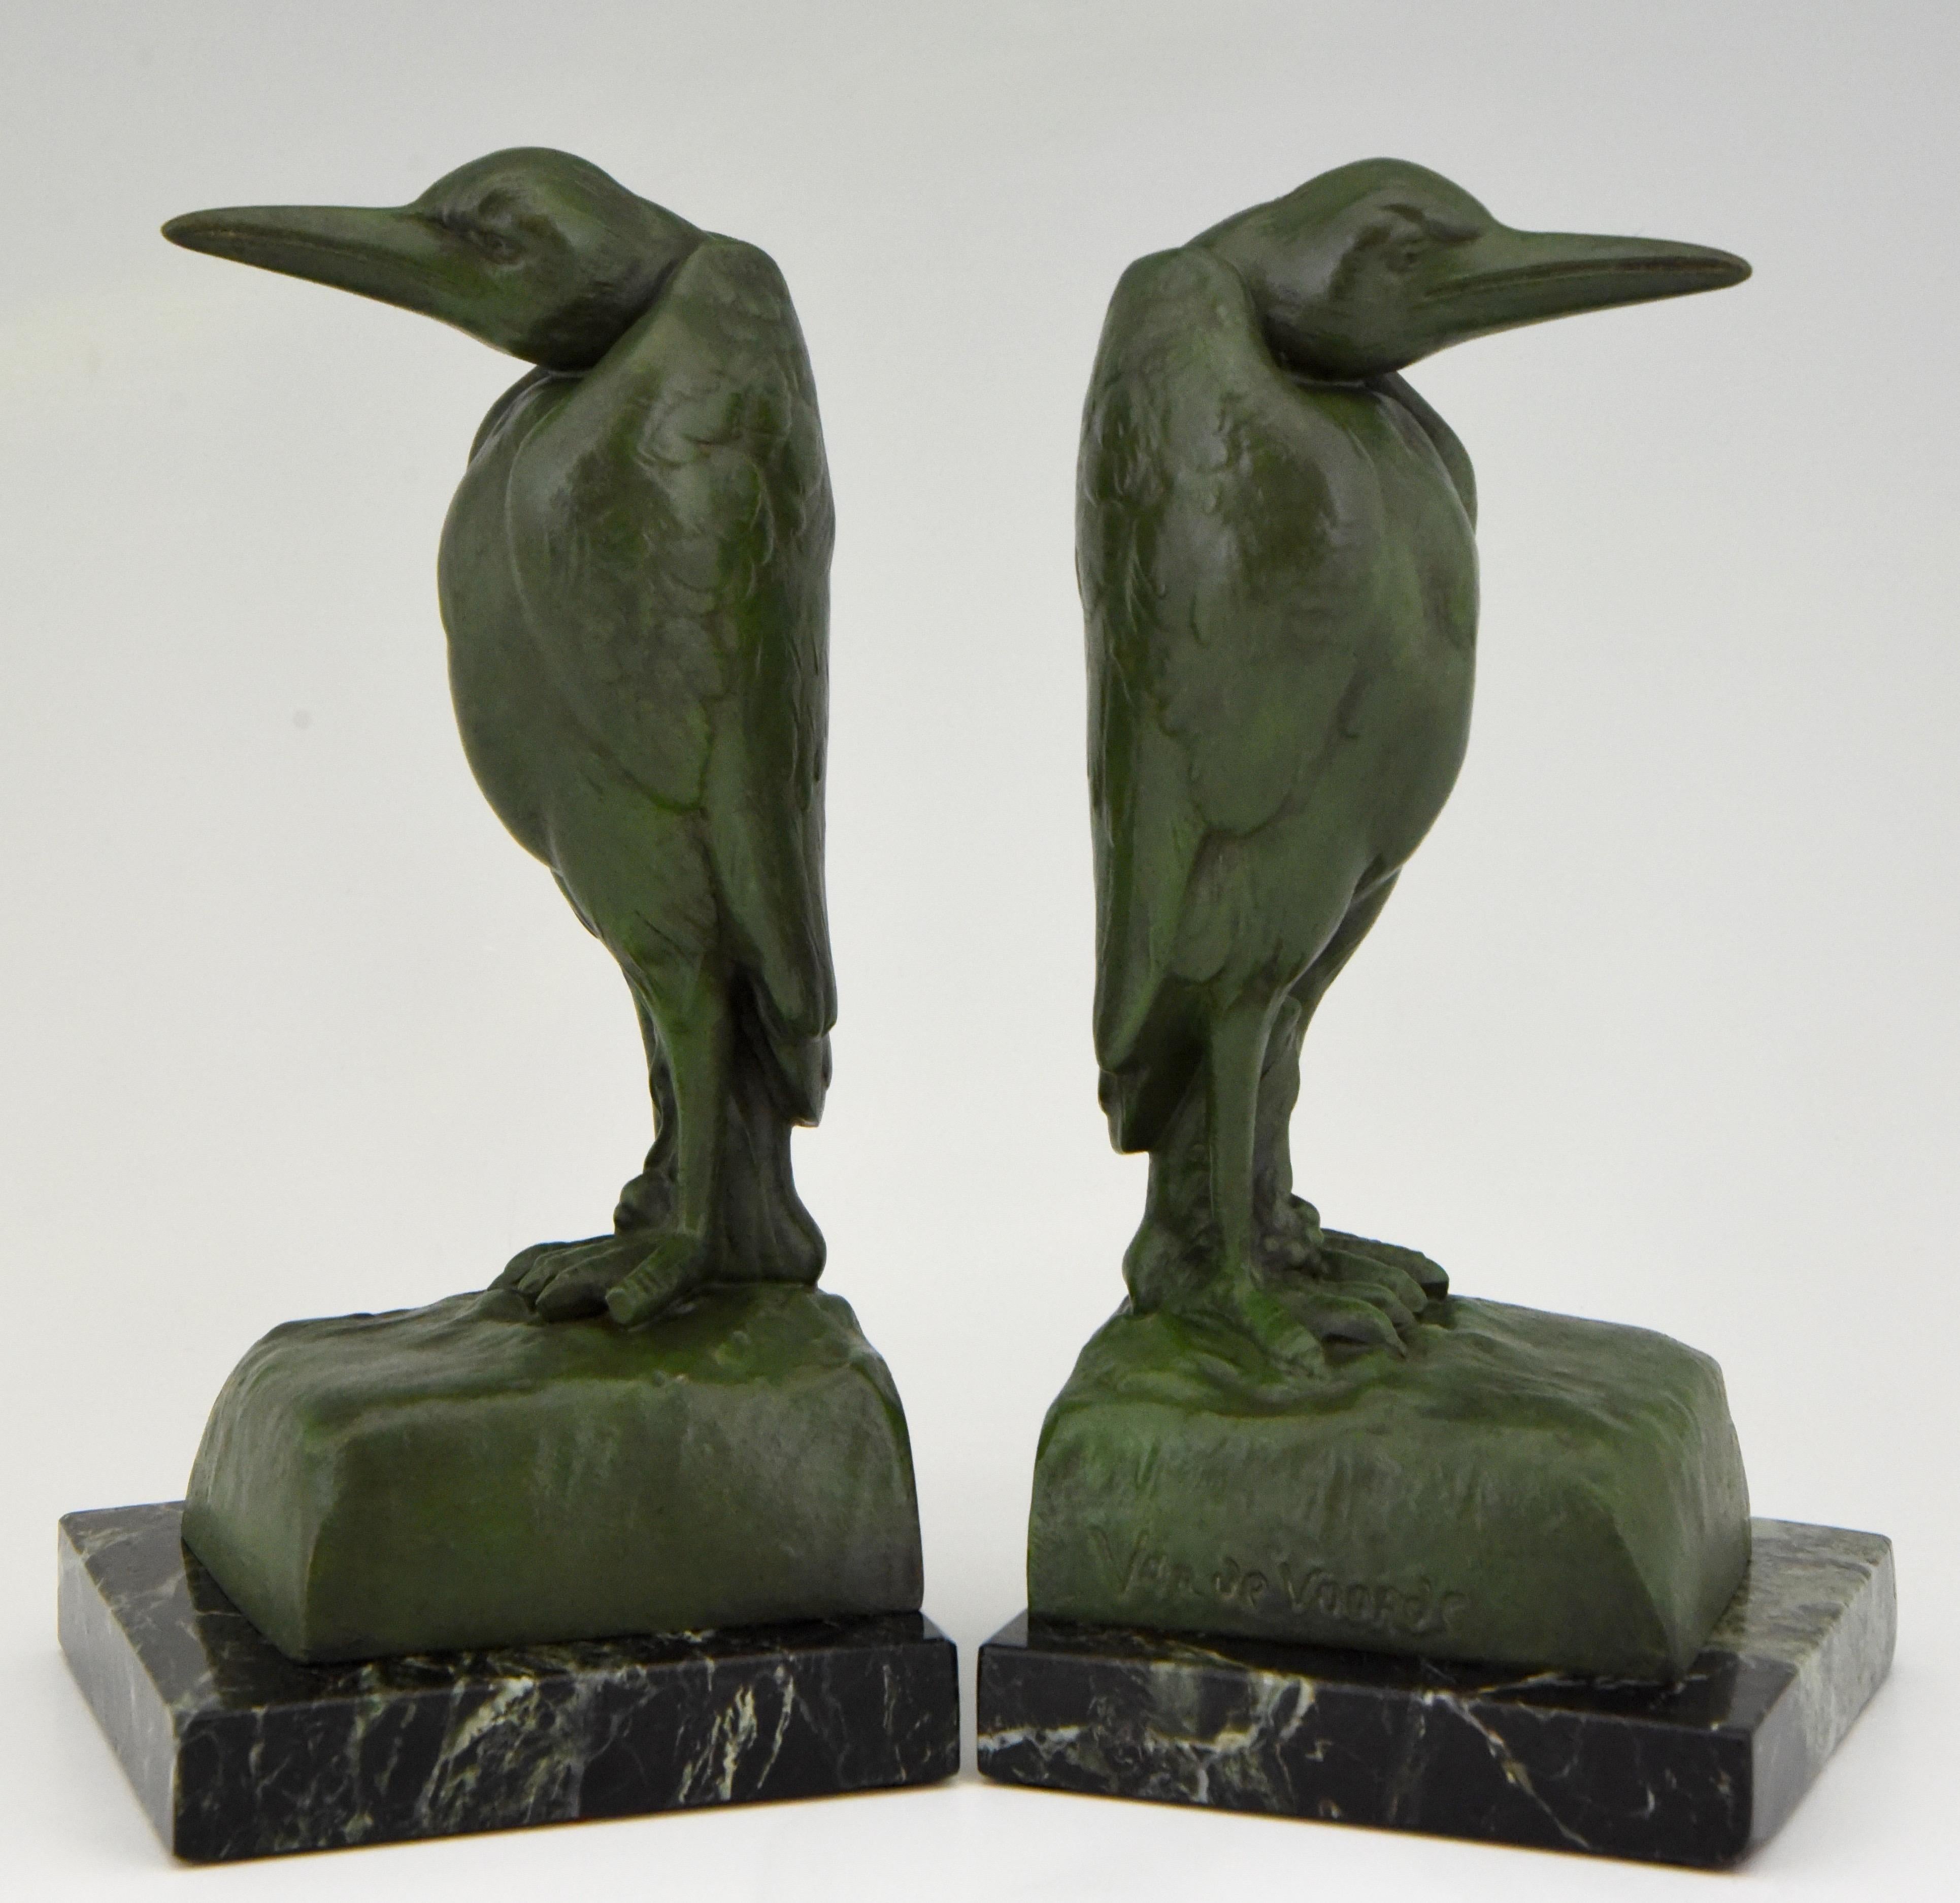 A nice pair of Art Deco Marabou bookends by Georges Van de Voorde,
Belgian artist born in 1878 worked in France. 
The bird sculptures are in Art Metal with a dark green patina and are mounted on green marble bases. 
Signed and with foundry